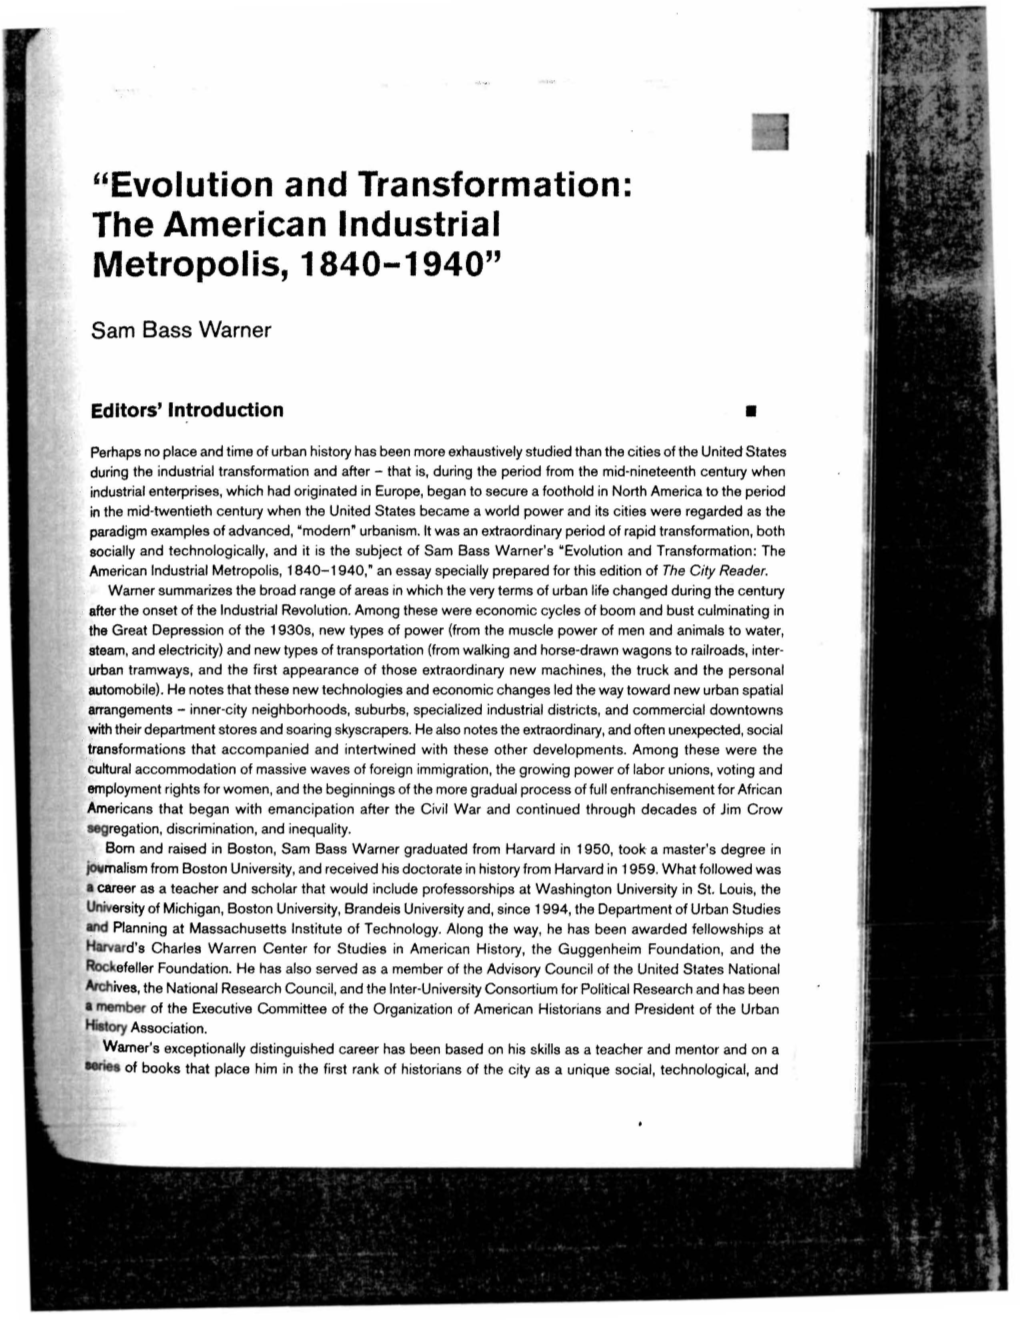 "Evolution and Transformation: the American Industrial Metropolis, 1840-1940"